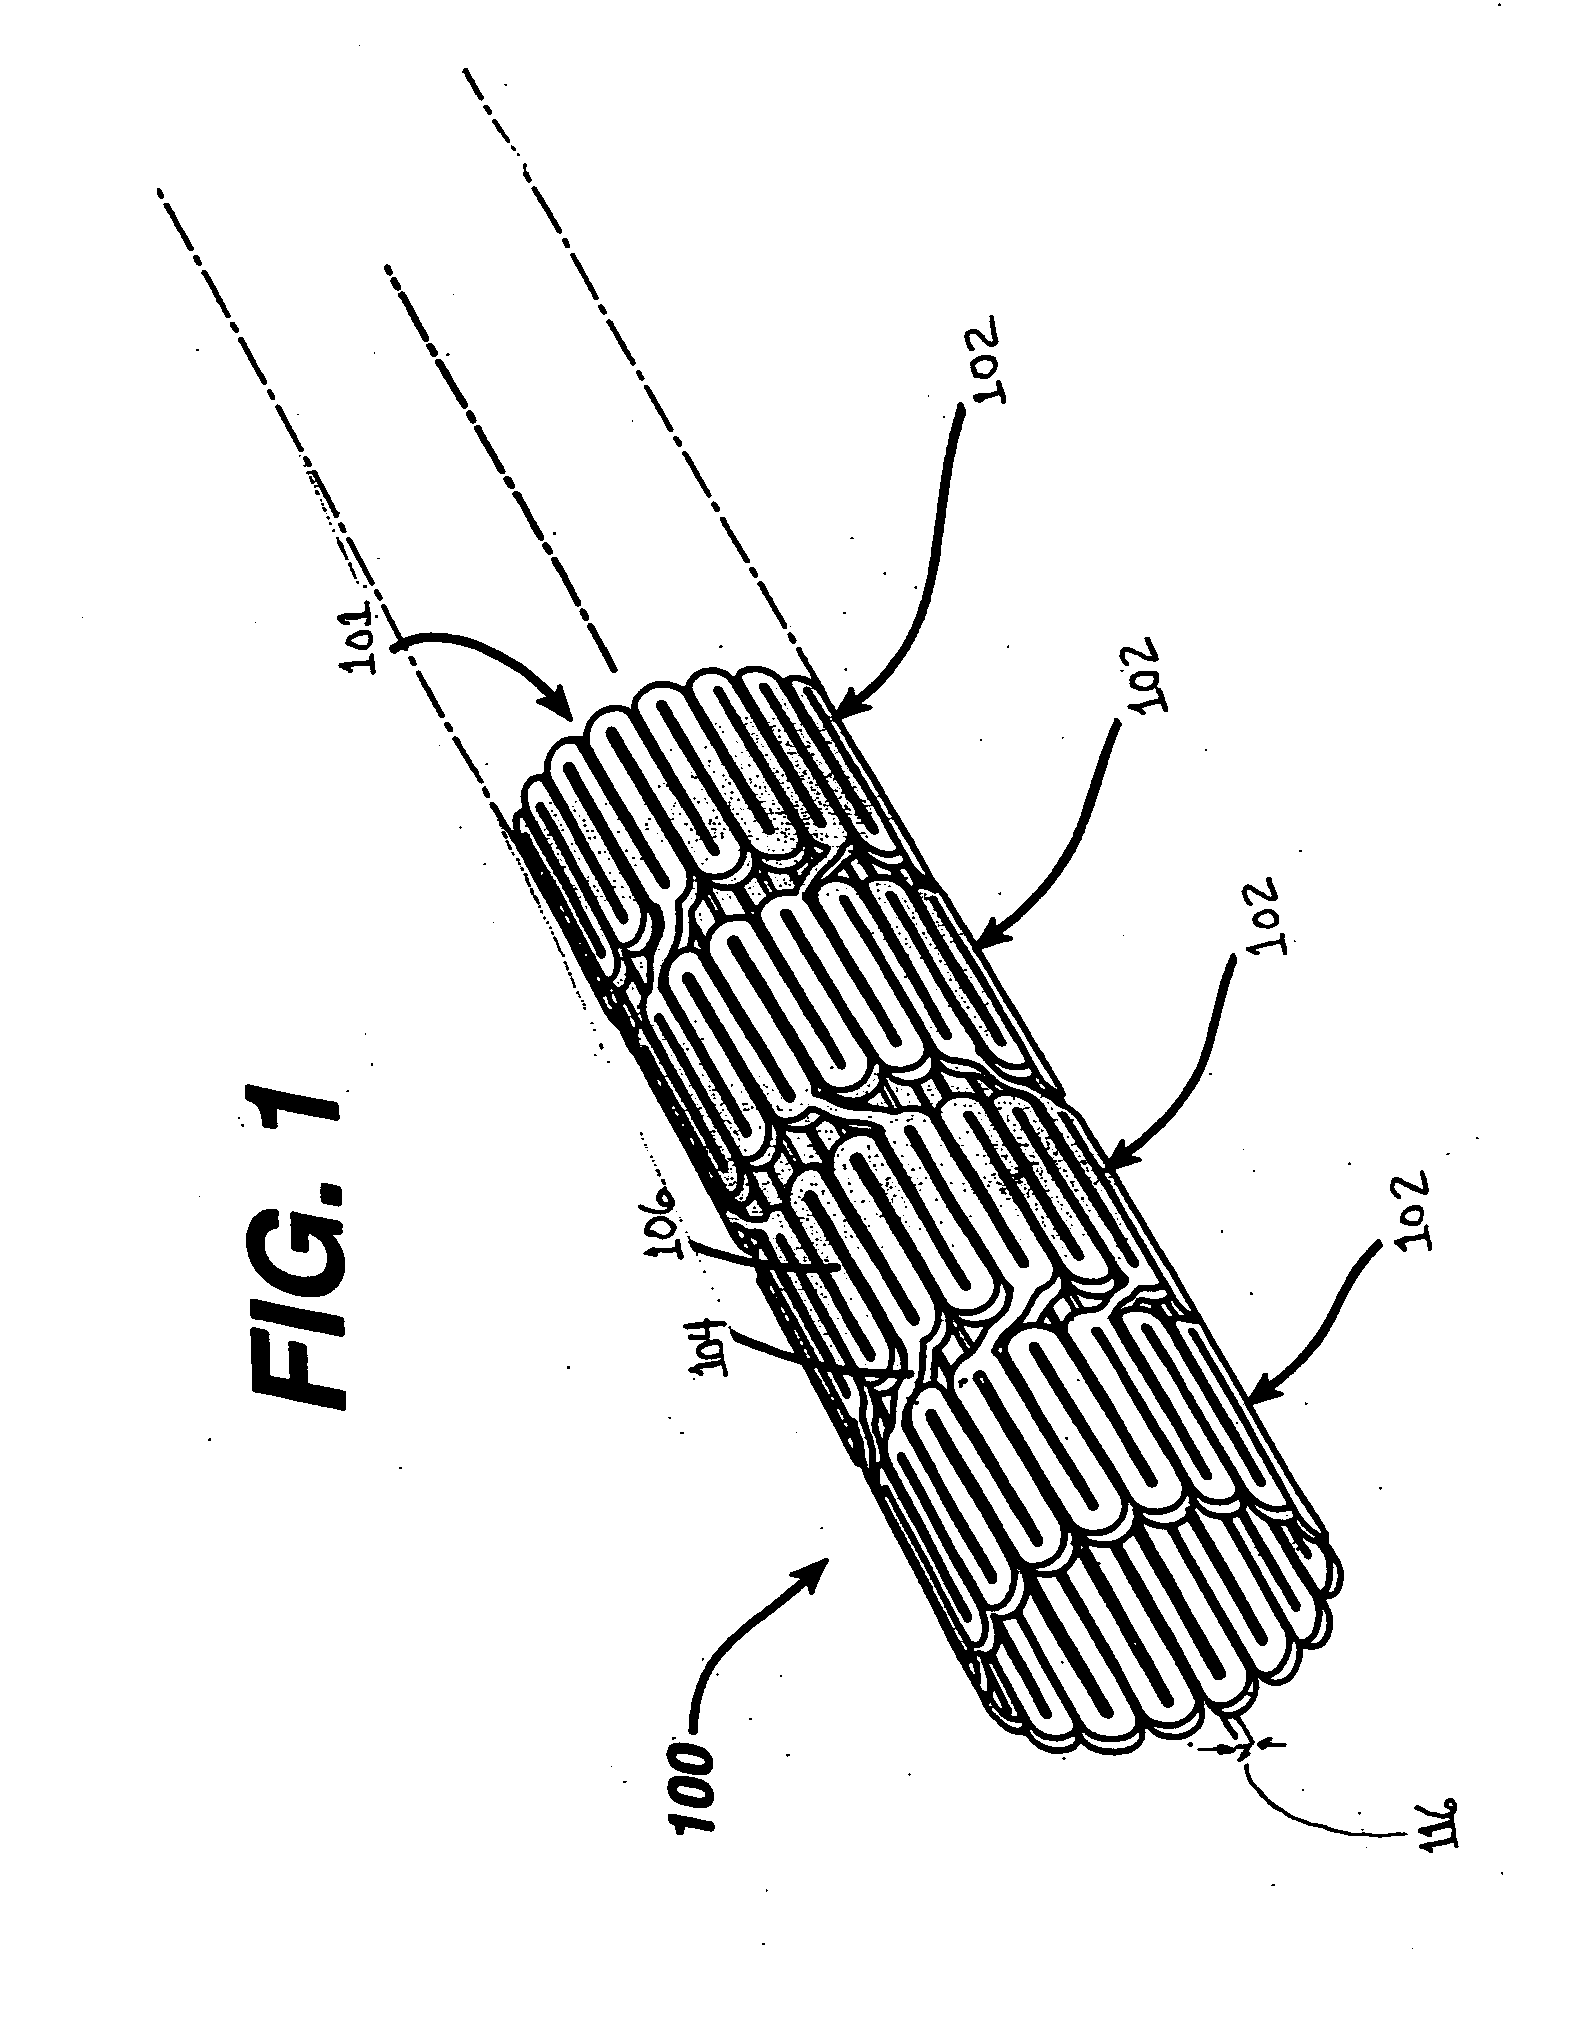 Method and apparatus for making polymeric drug delivery devices having differing morphological structures